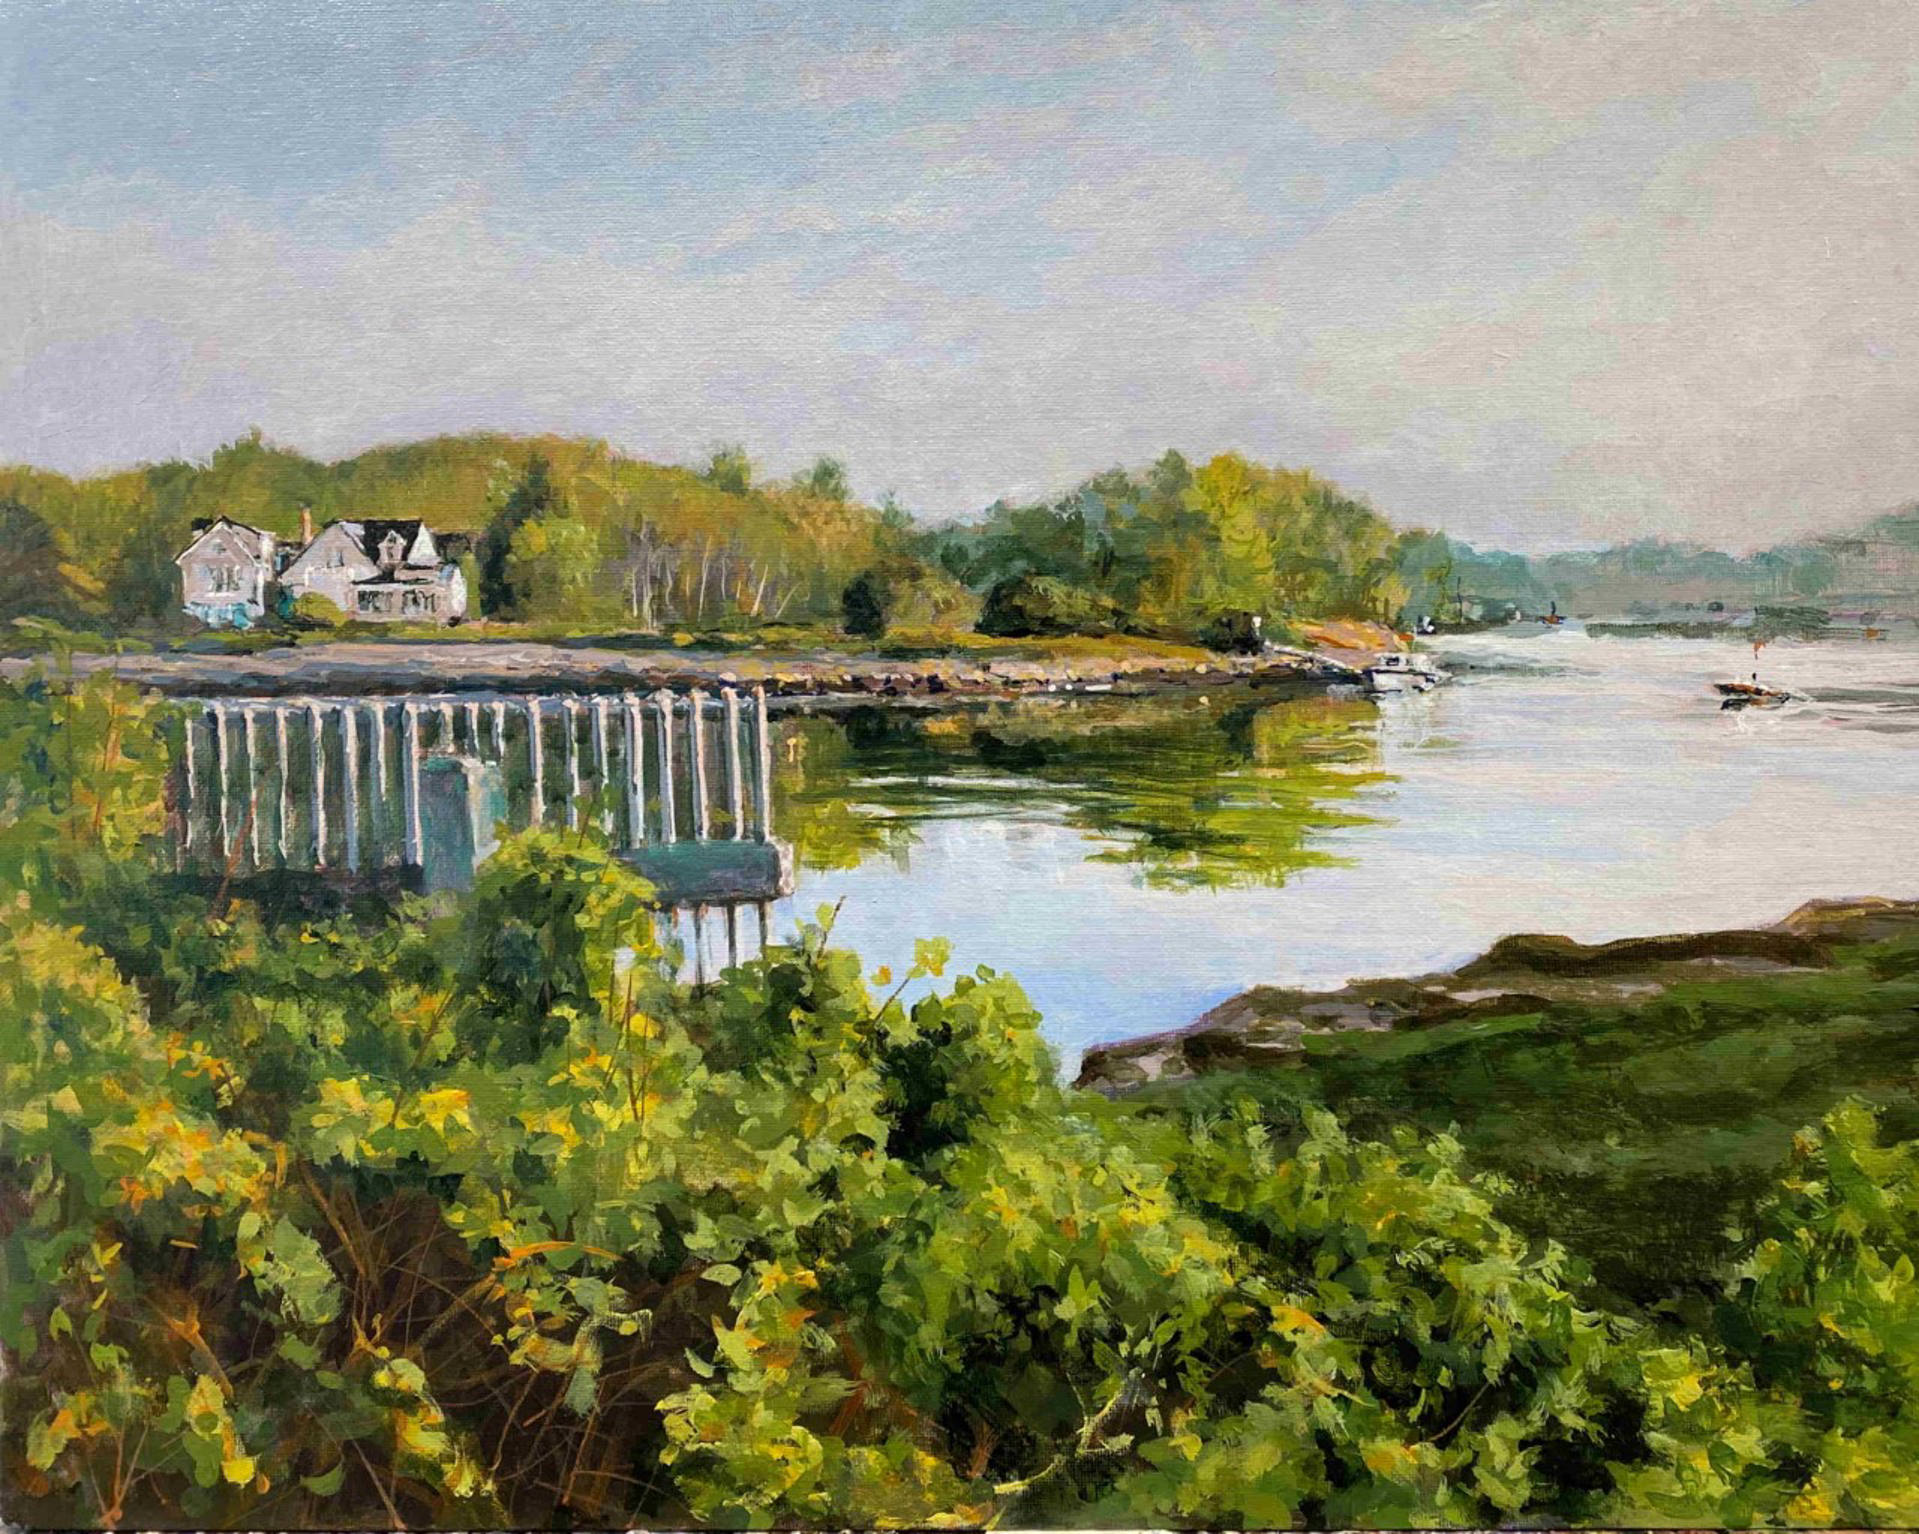 Spring Morning on the Kennebunk by Douglas H. Caves Sr.